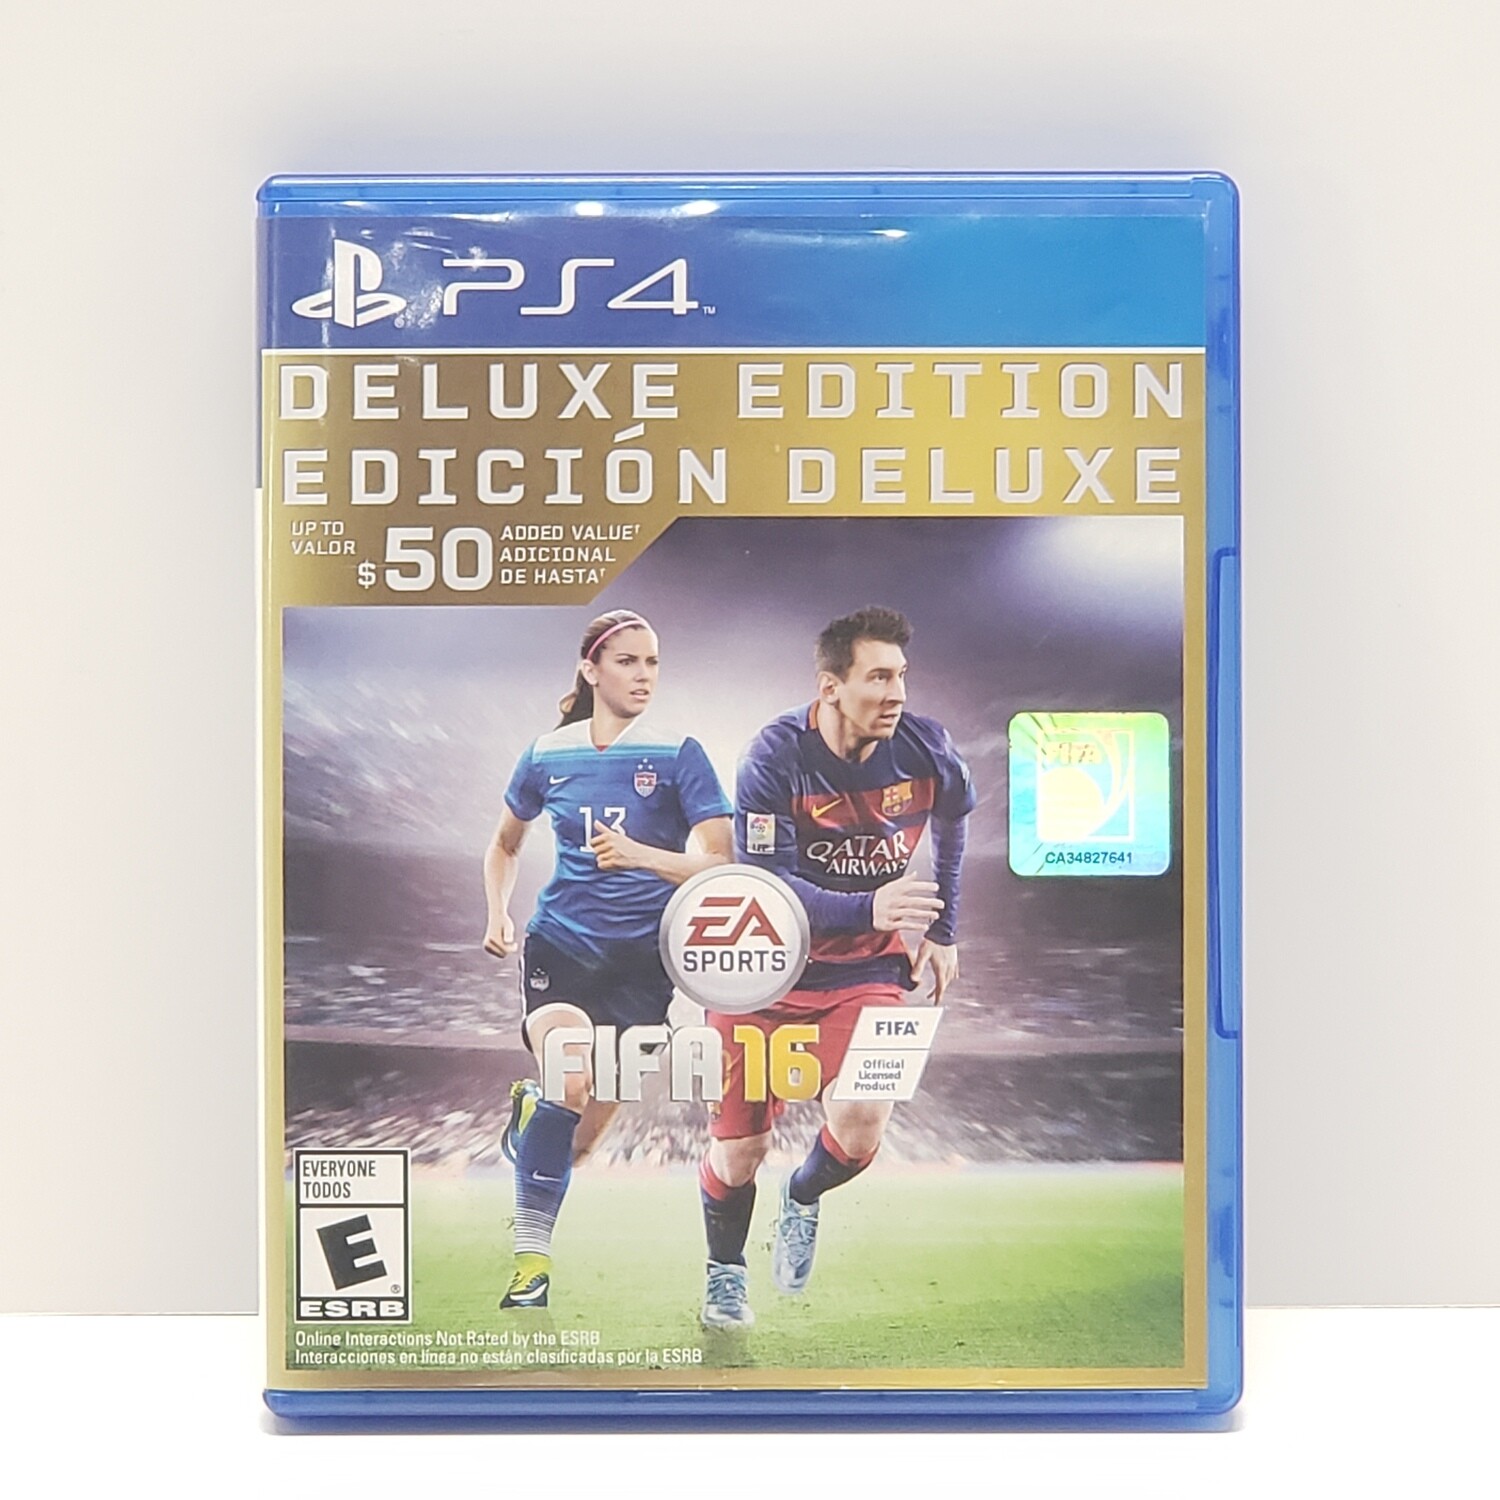 FIFA 16 Deluxe Edition Video Game for PS4 - Used